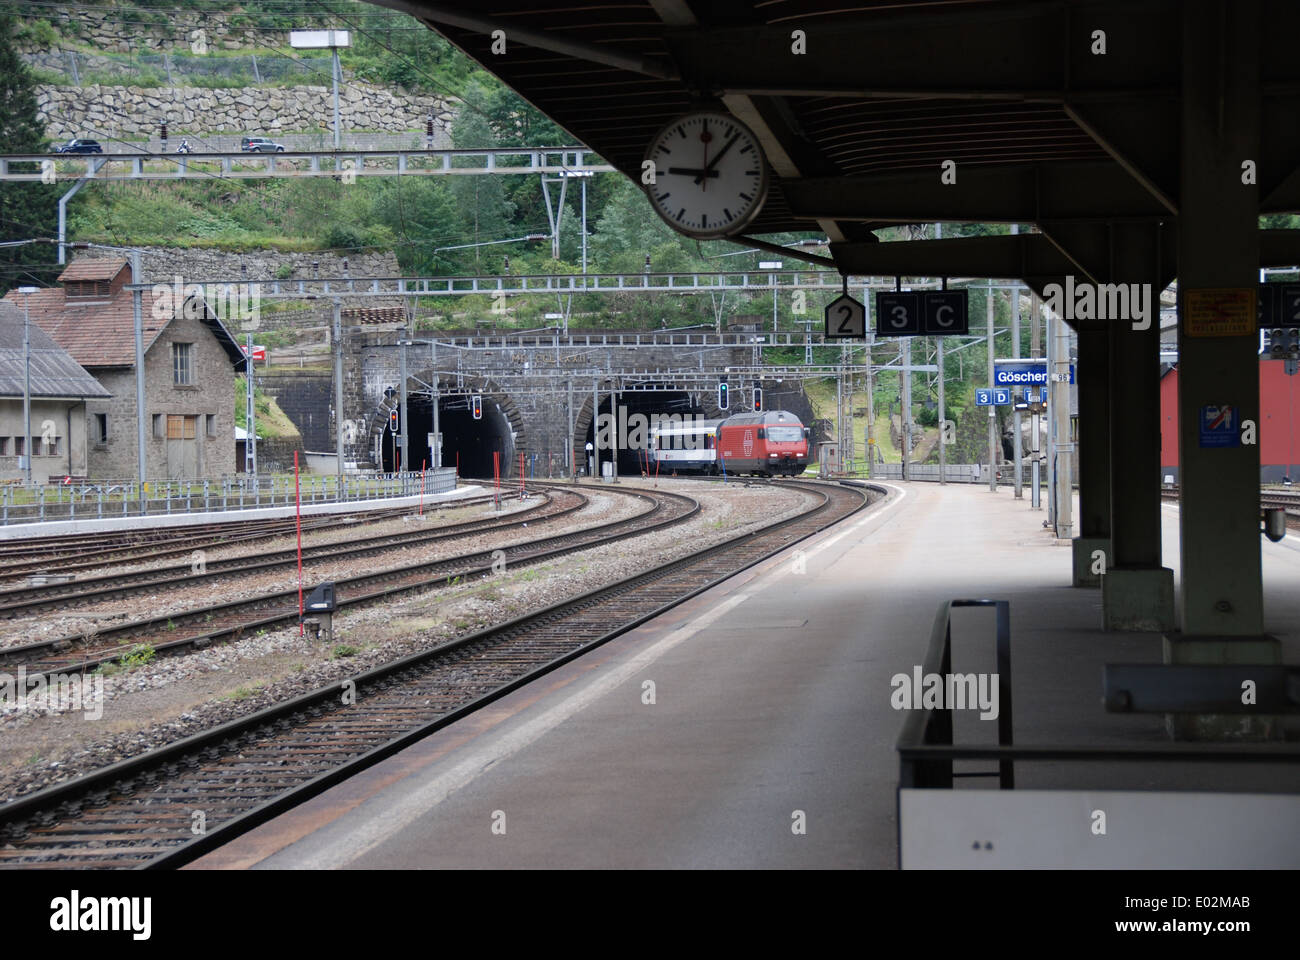 Goschenen railway station in Switzerland looking towards northern entrance of St. Gotthard Tunnel with train emerging. Stock Photo